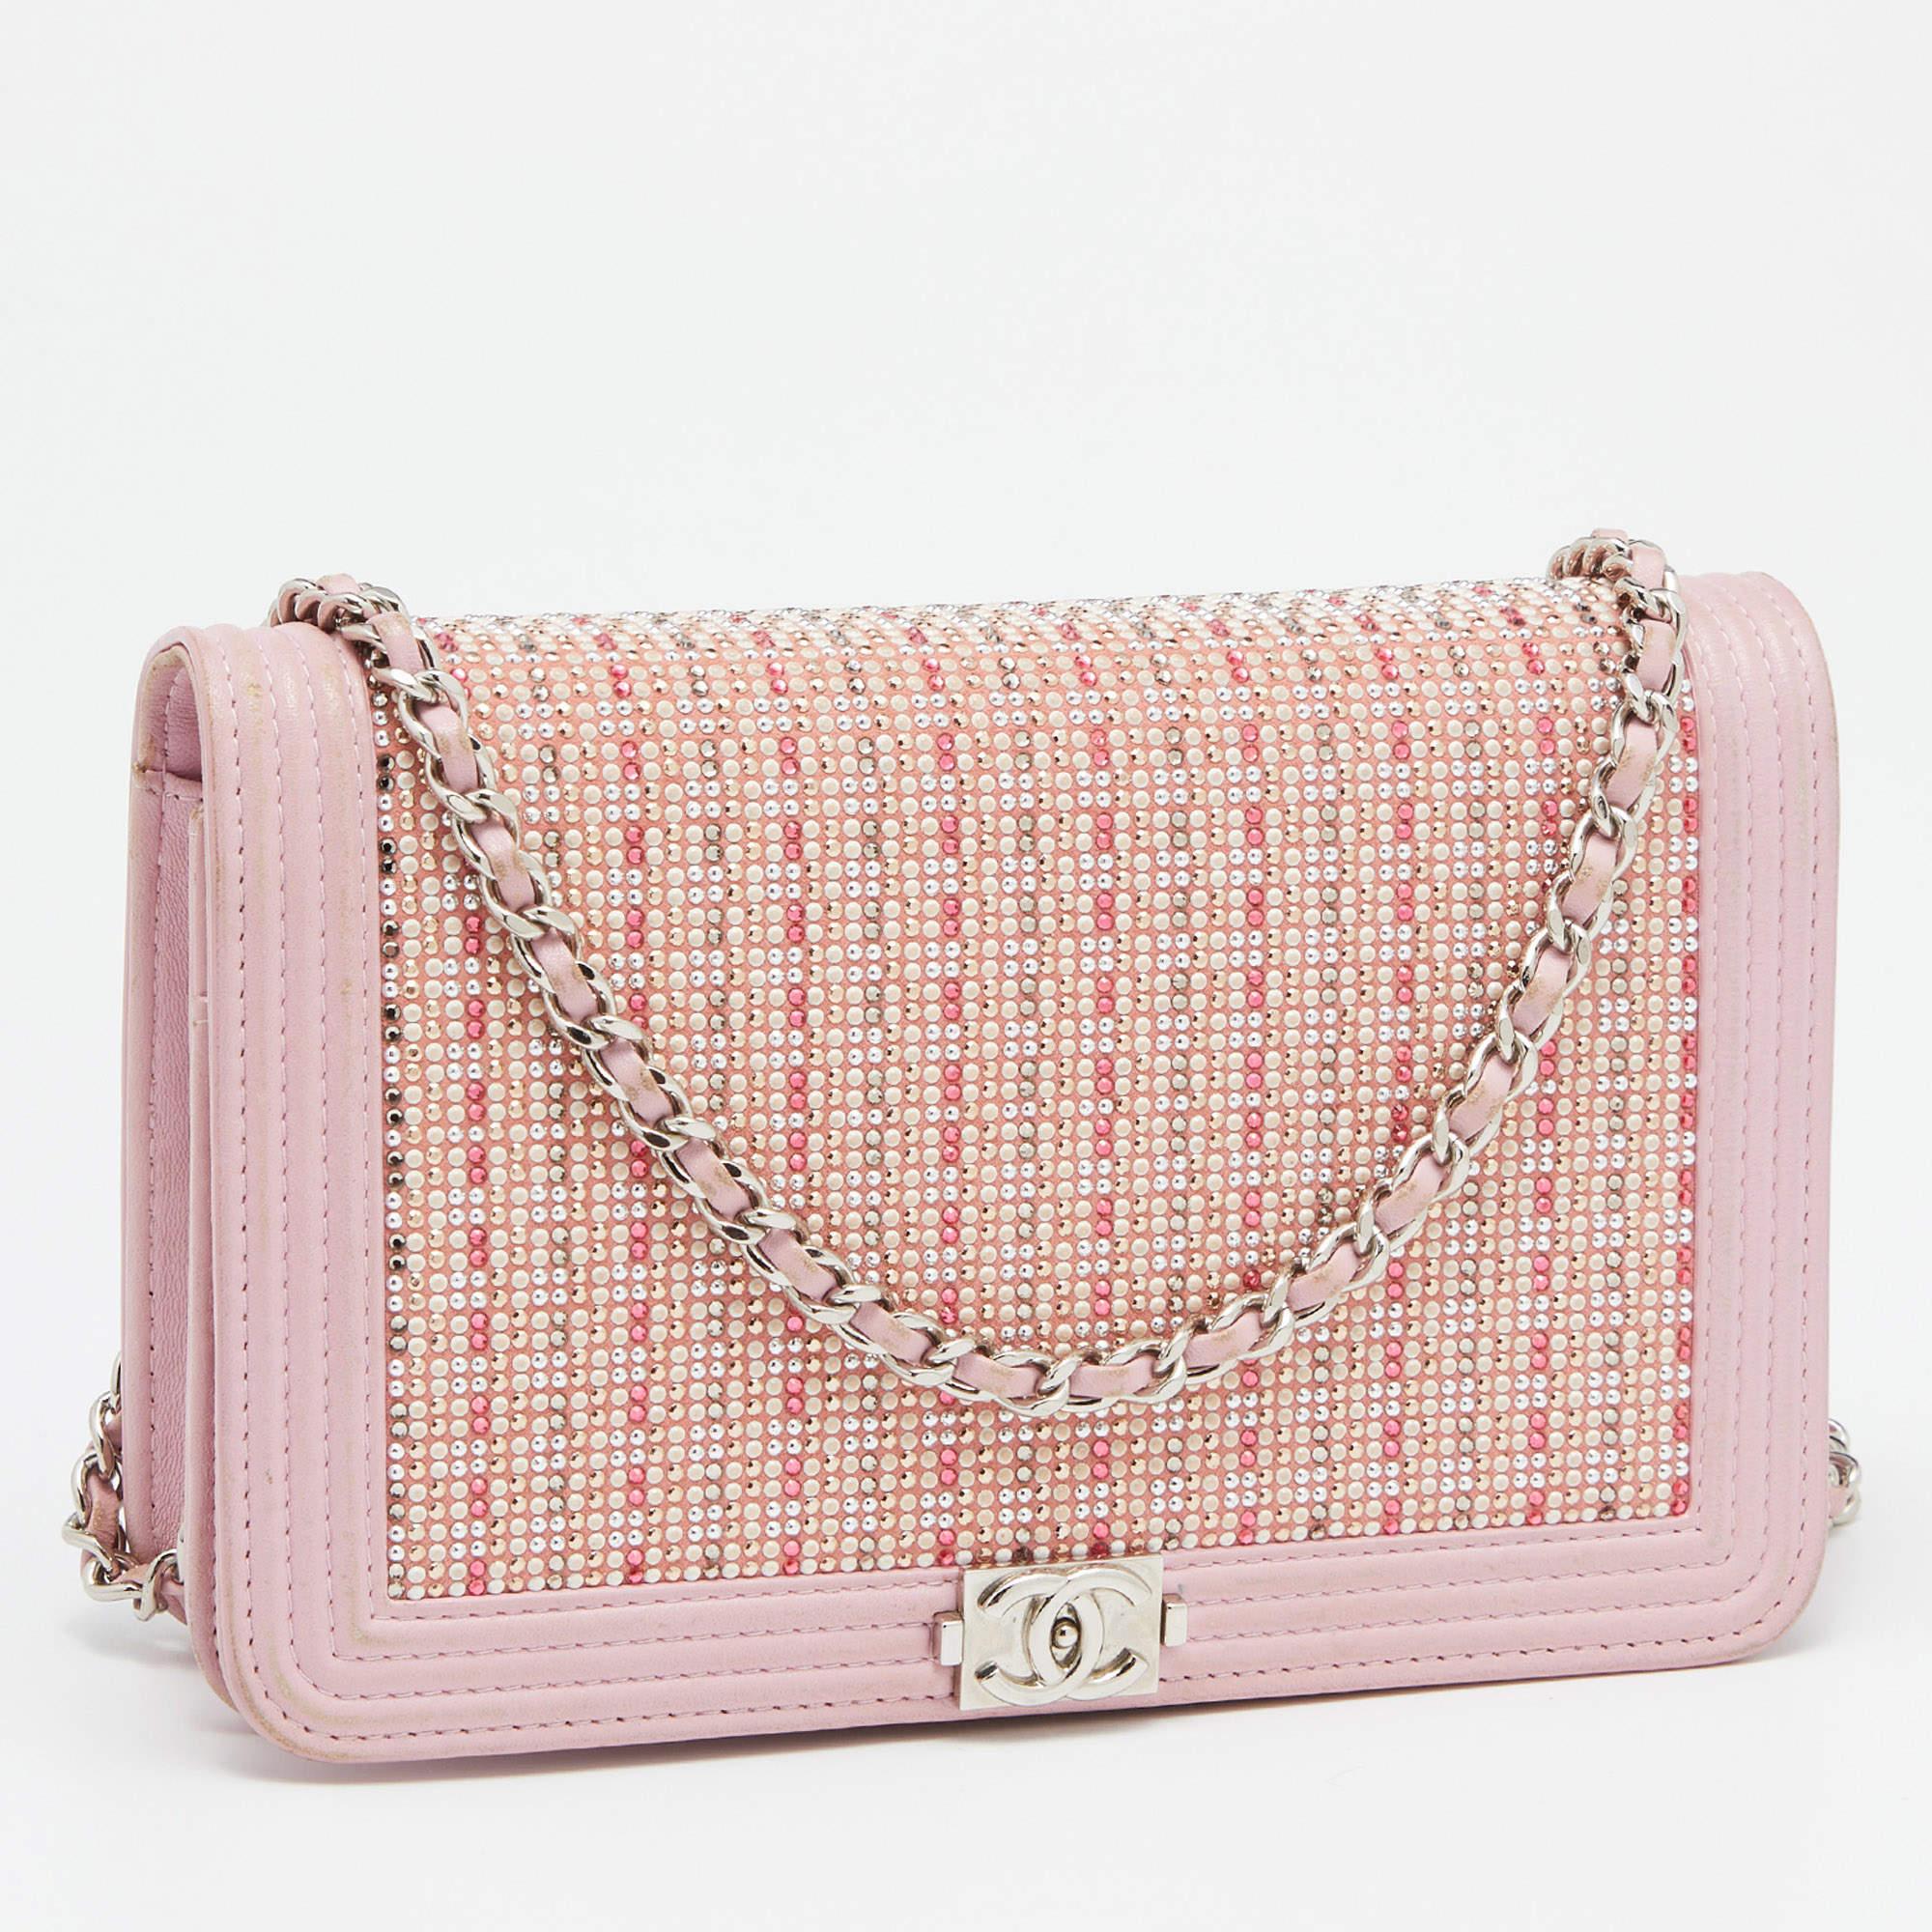 Women's Chanel Light Pink Leather Crystals Embellished Boy Wallet On Chain